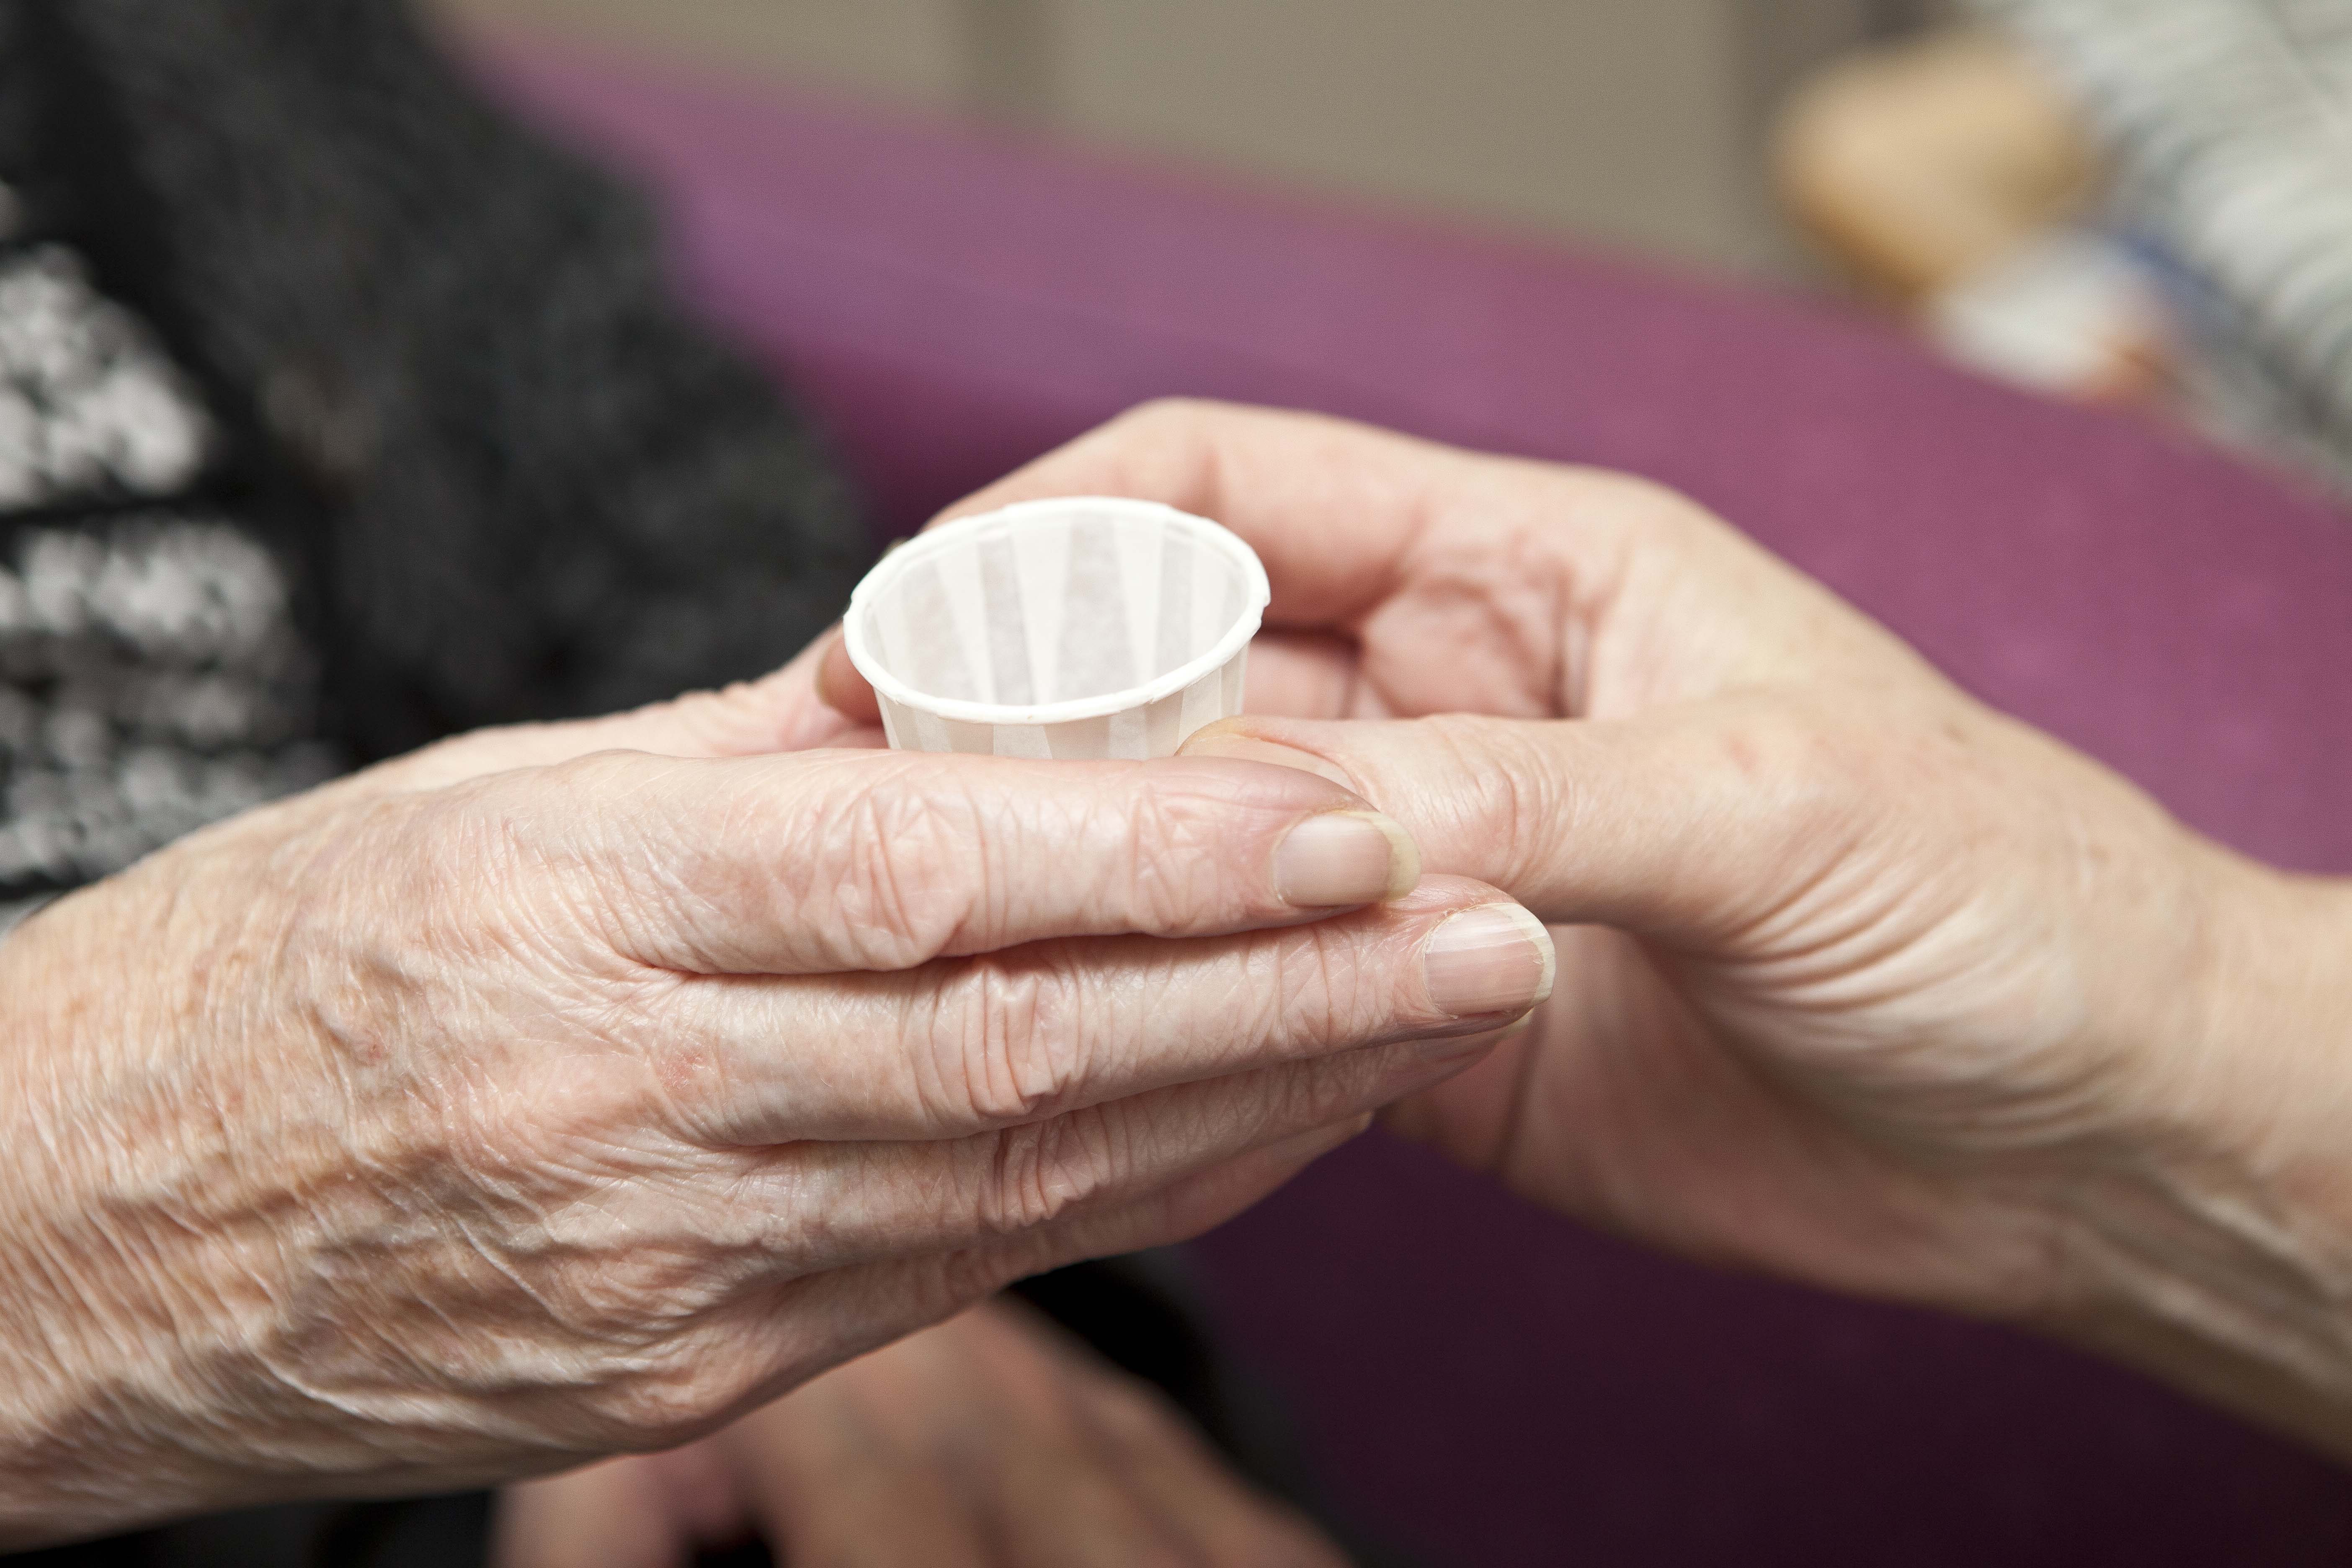 two hands passing medication in a cup